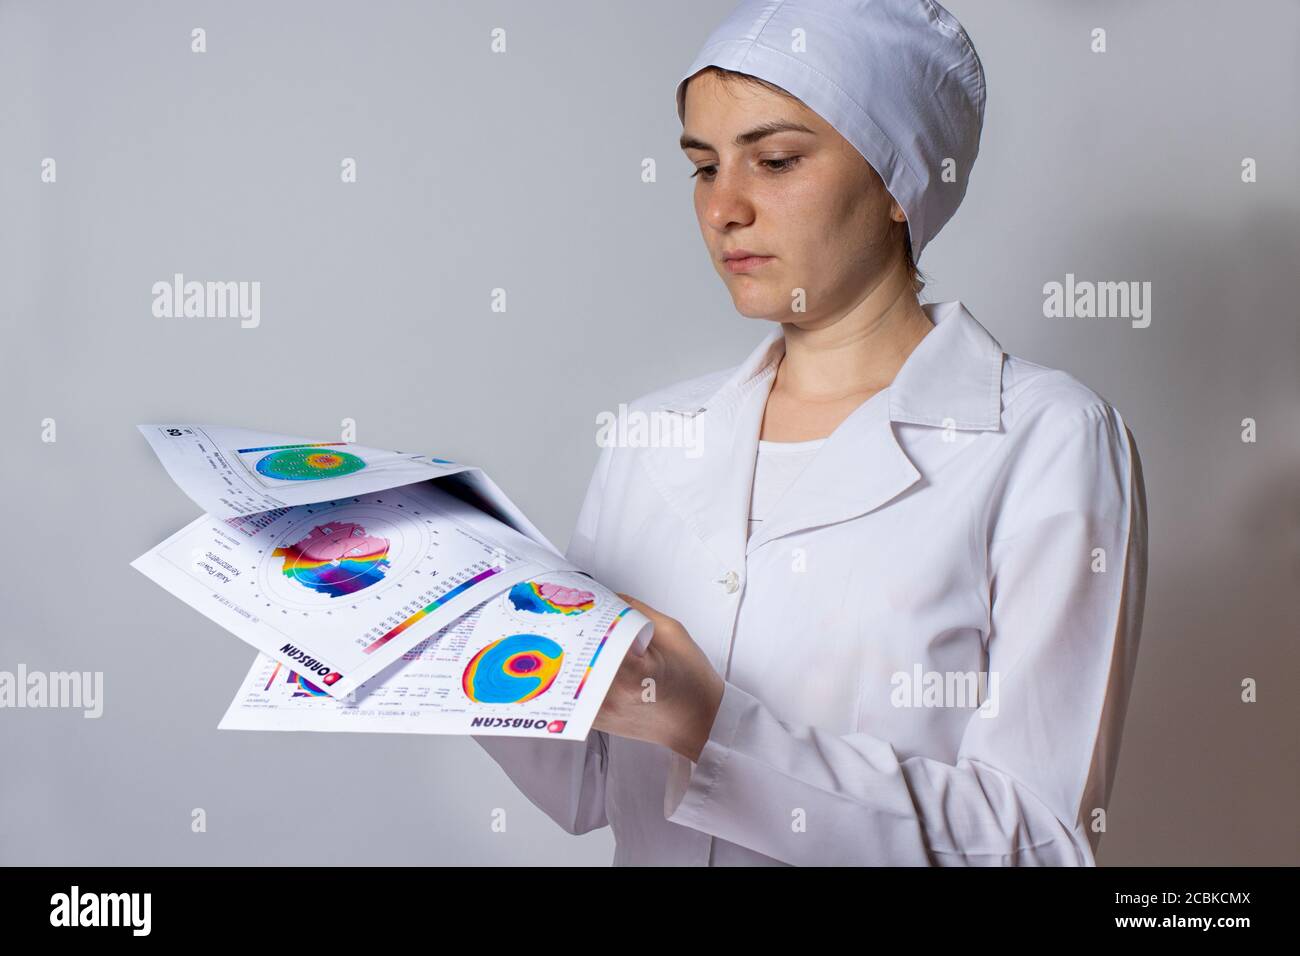 Thinning corneal dystrophy, eye keratotopography. Stock Photo